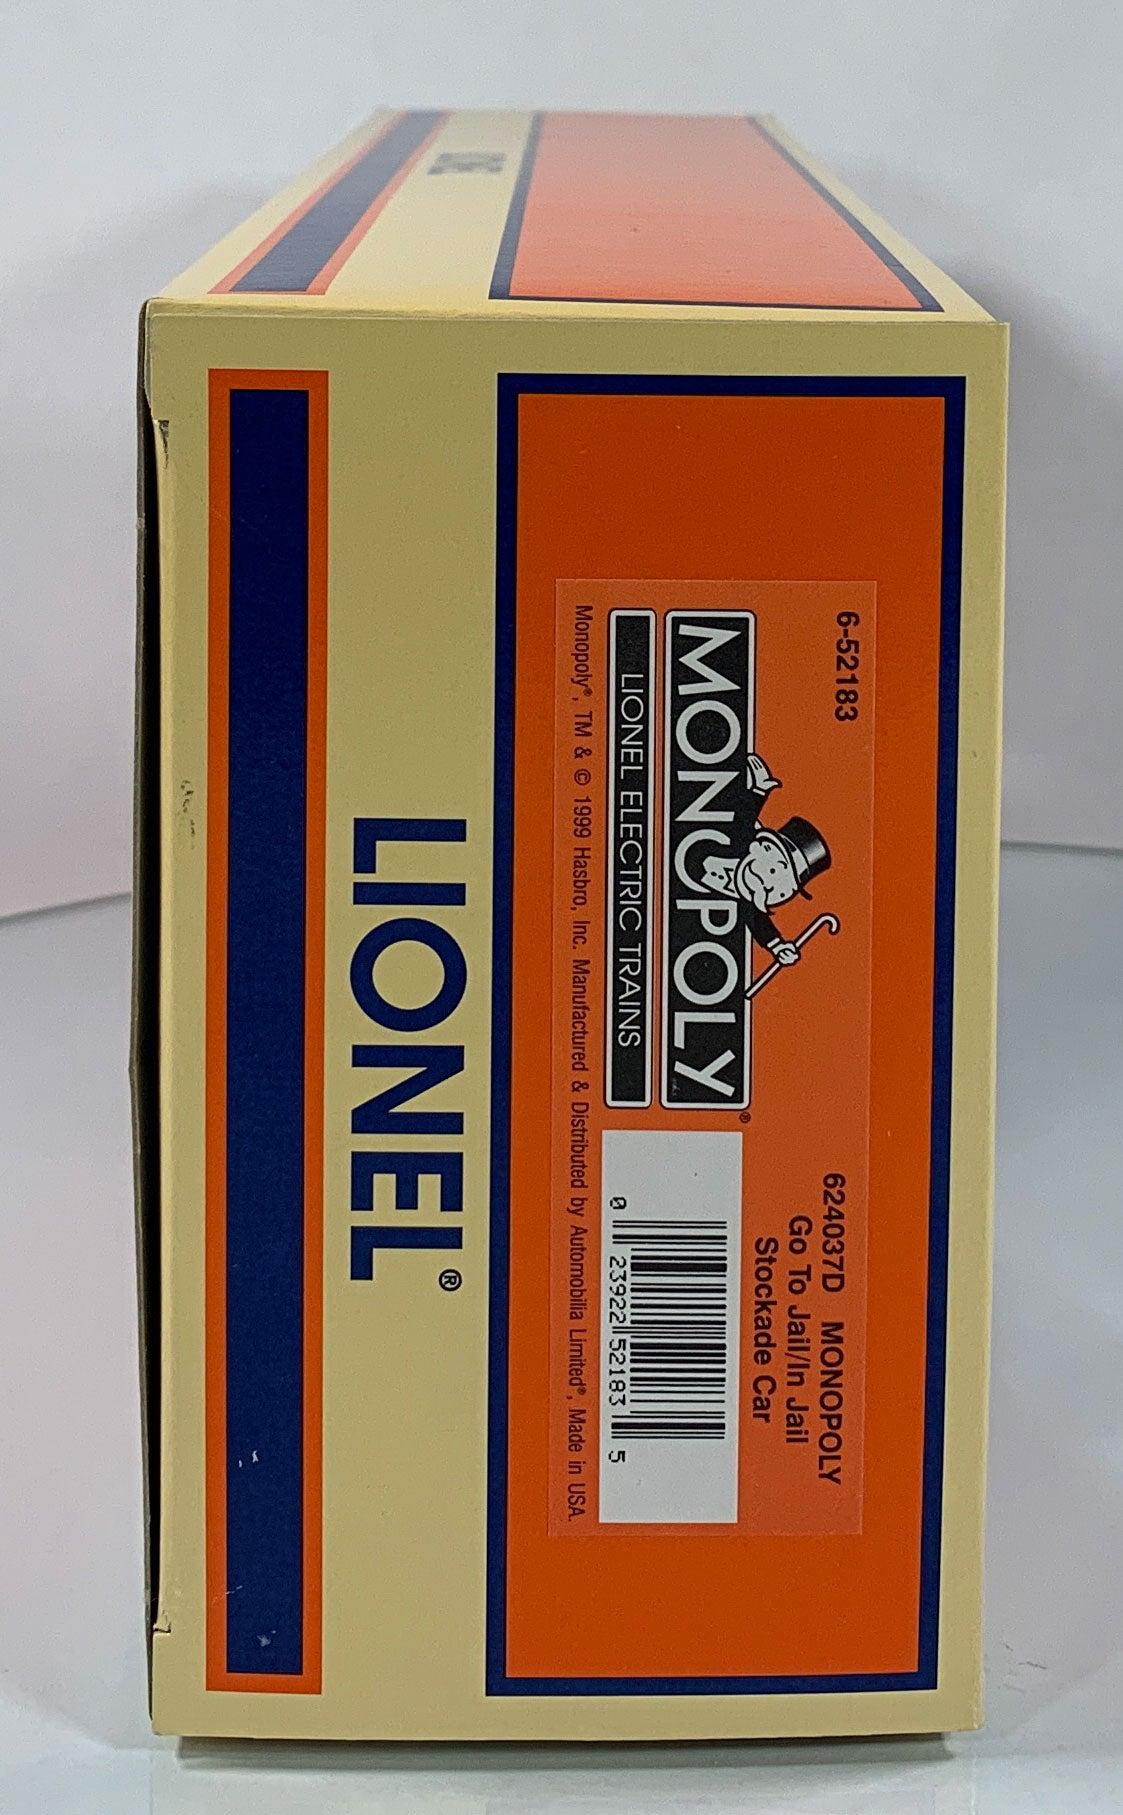 LIONEL • O GAUGE • 1999 Monopoly –Go to Jail Illuminated Stockade Car 6-52183 • NEW OLD STOCK